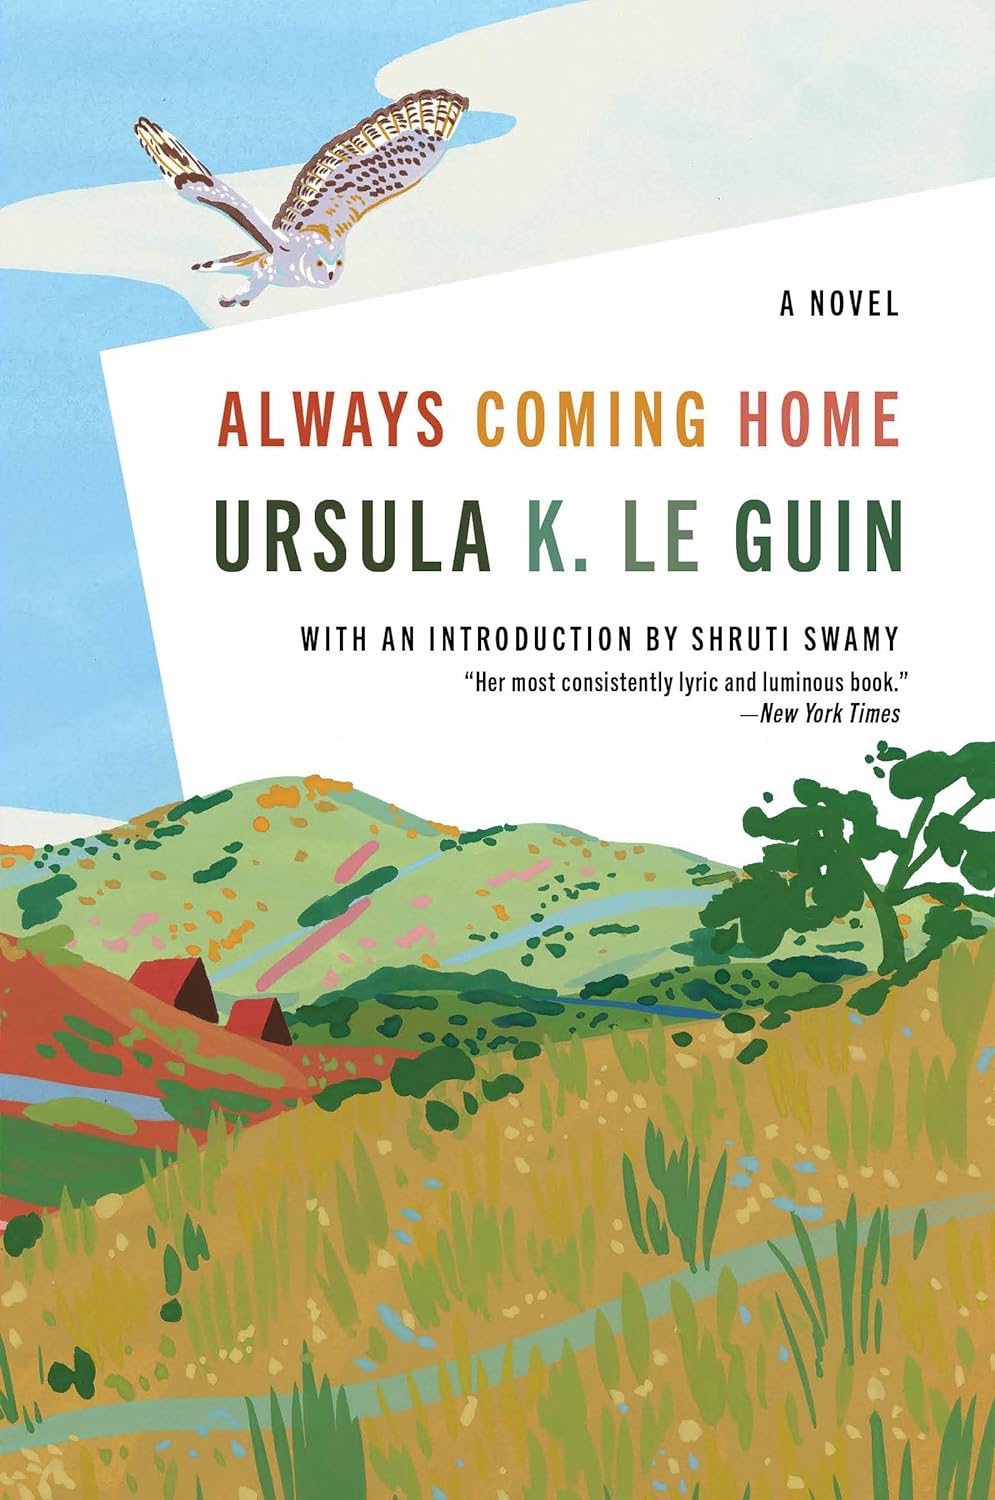 The cover of 'Always Coming Home' by Ursula K. Le Guin, with an illustration of lush, rolling hills, red-roofed houses, and an owl flying overhead.